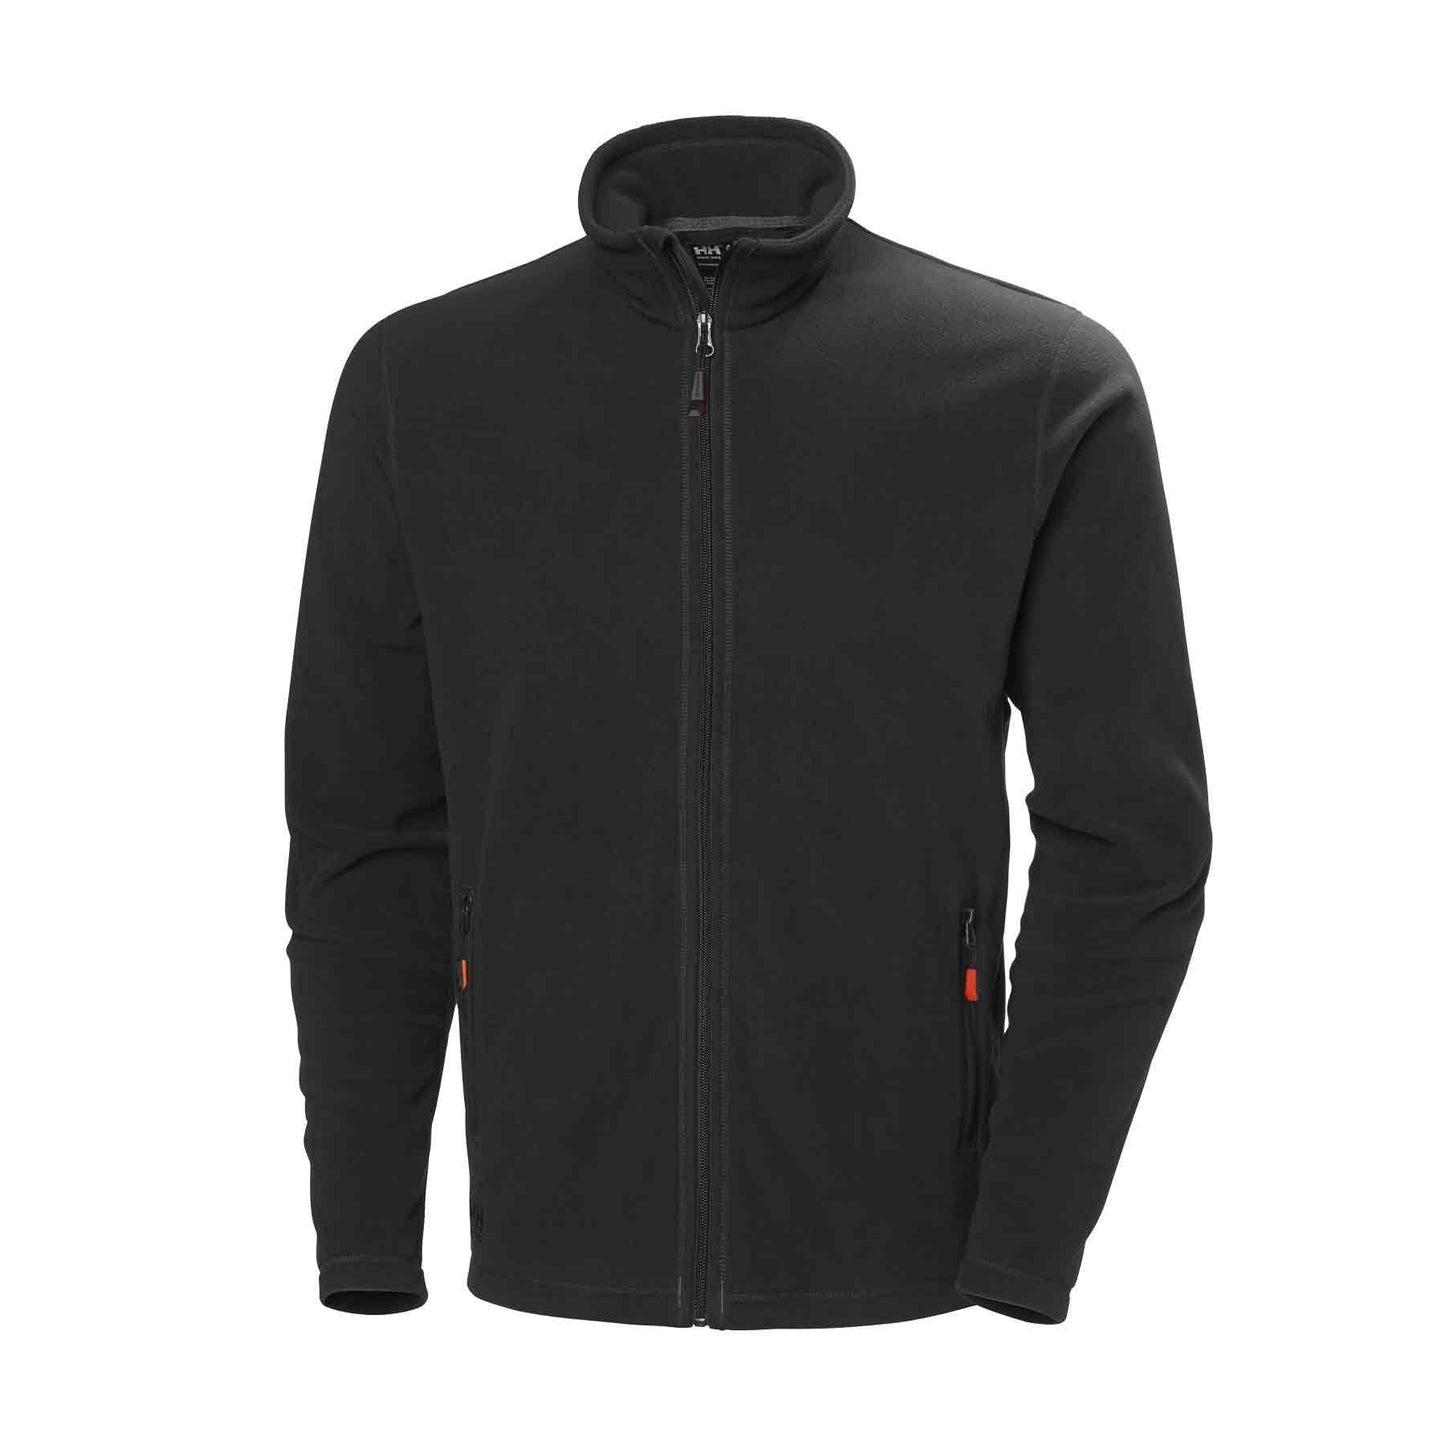 Men’s Oxford Light Fleece Jacket by Helly Hansen - The Luxury Promotional Gifts Company Limited